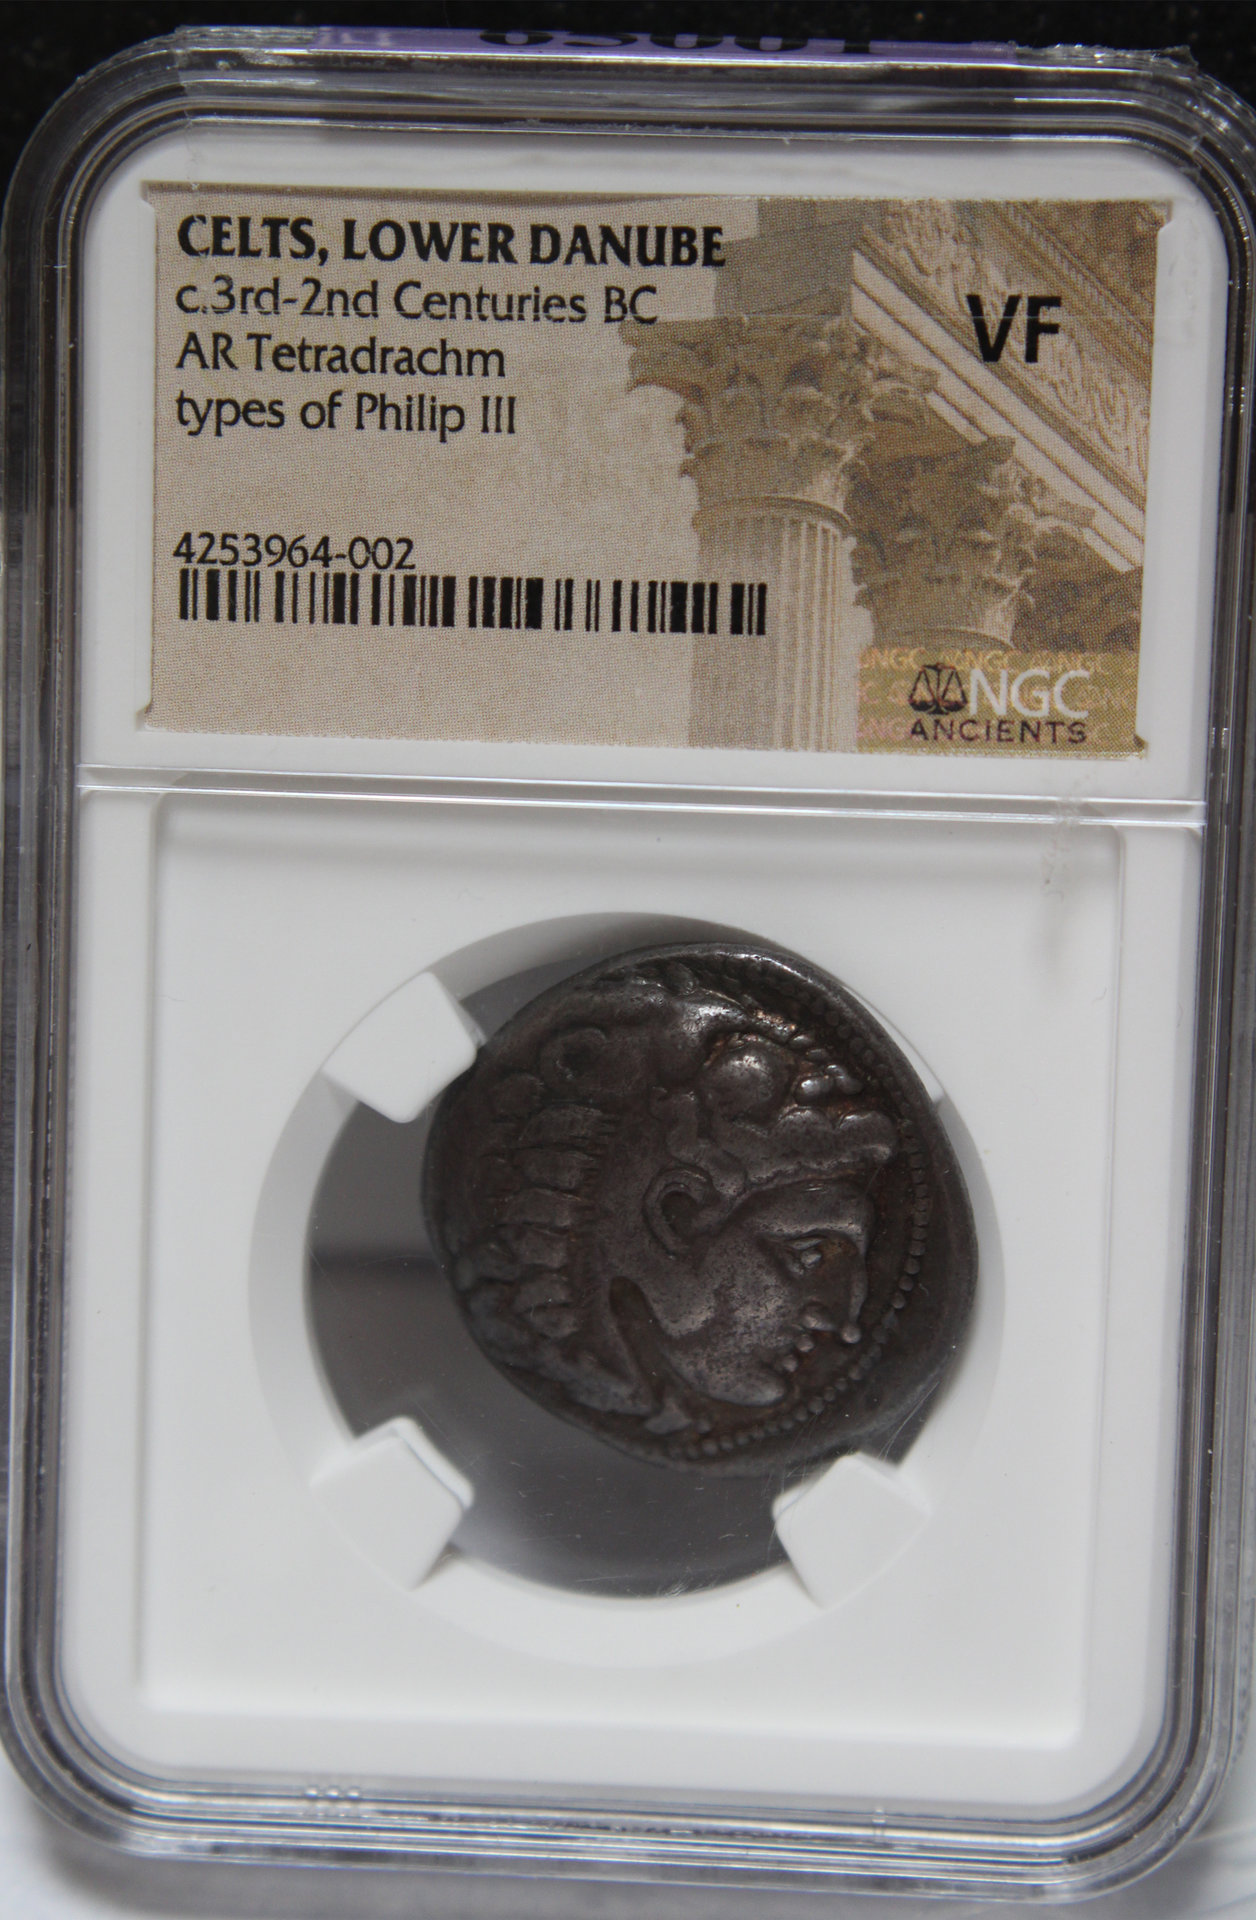 D-Camera NGC, Coin out of holding prongs,  6-10-20.jpg